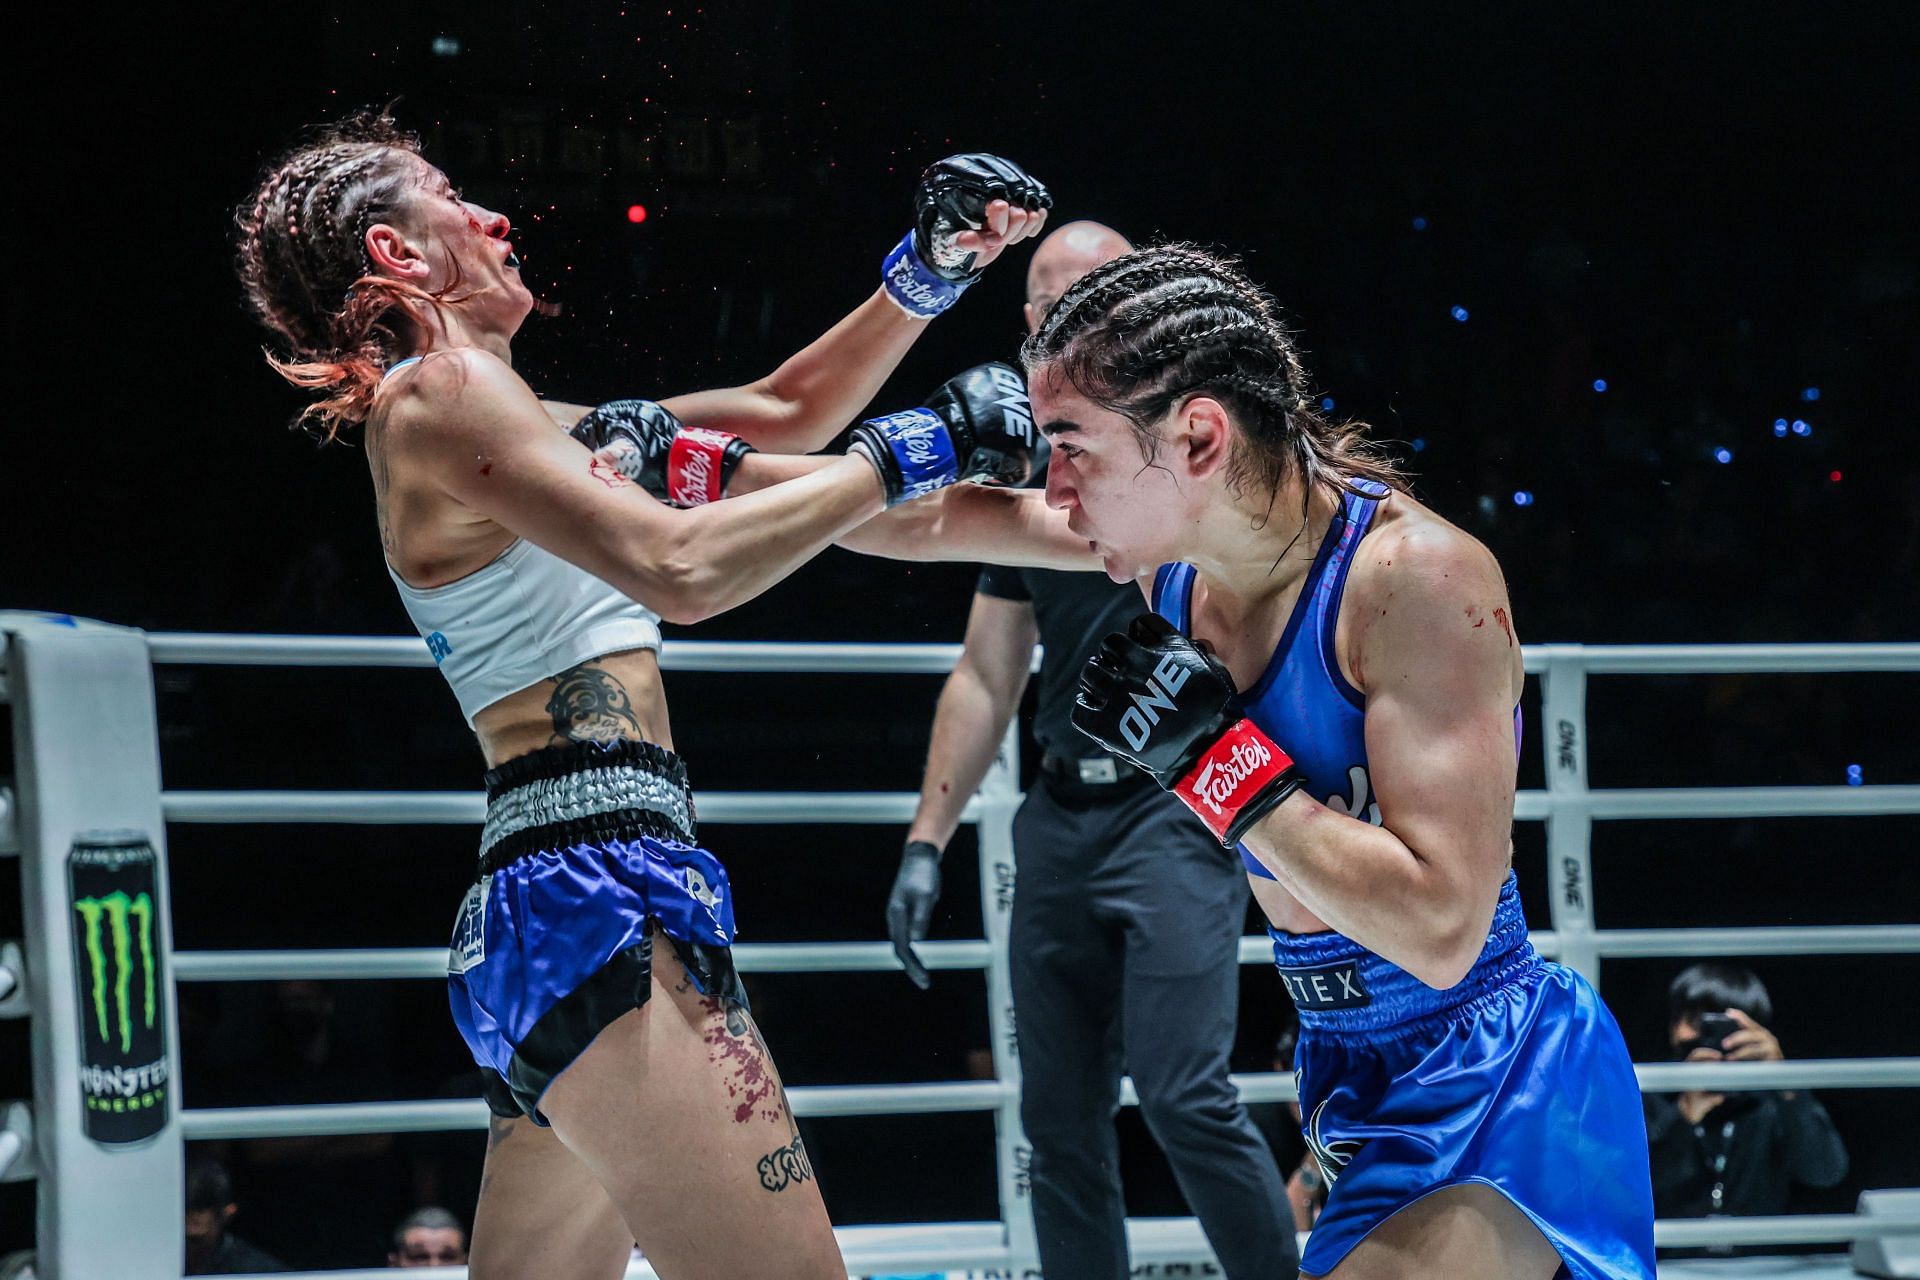 Shir Cohen&#039;s ferocious fists starting the finishing sequence against Teodora Kirilova.